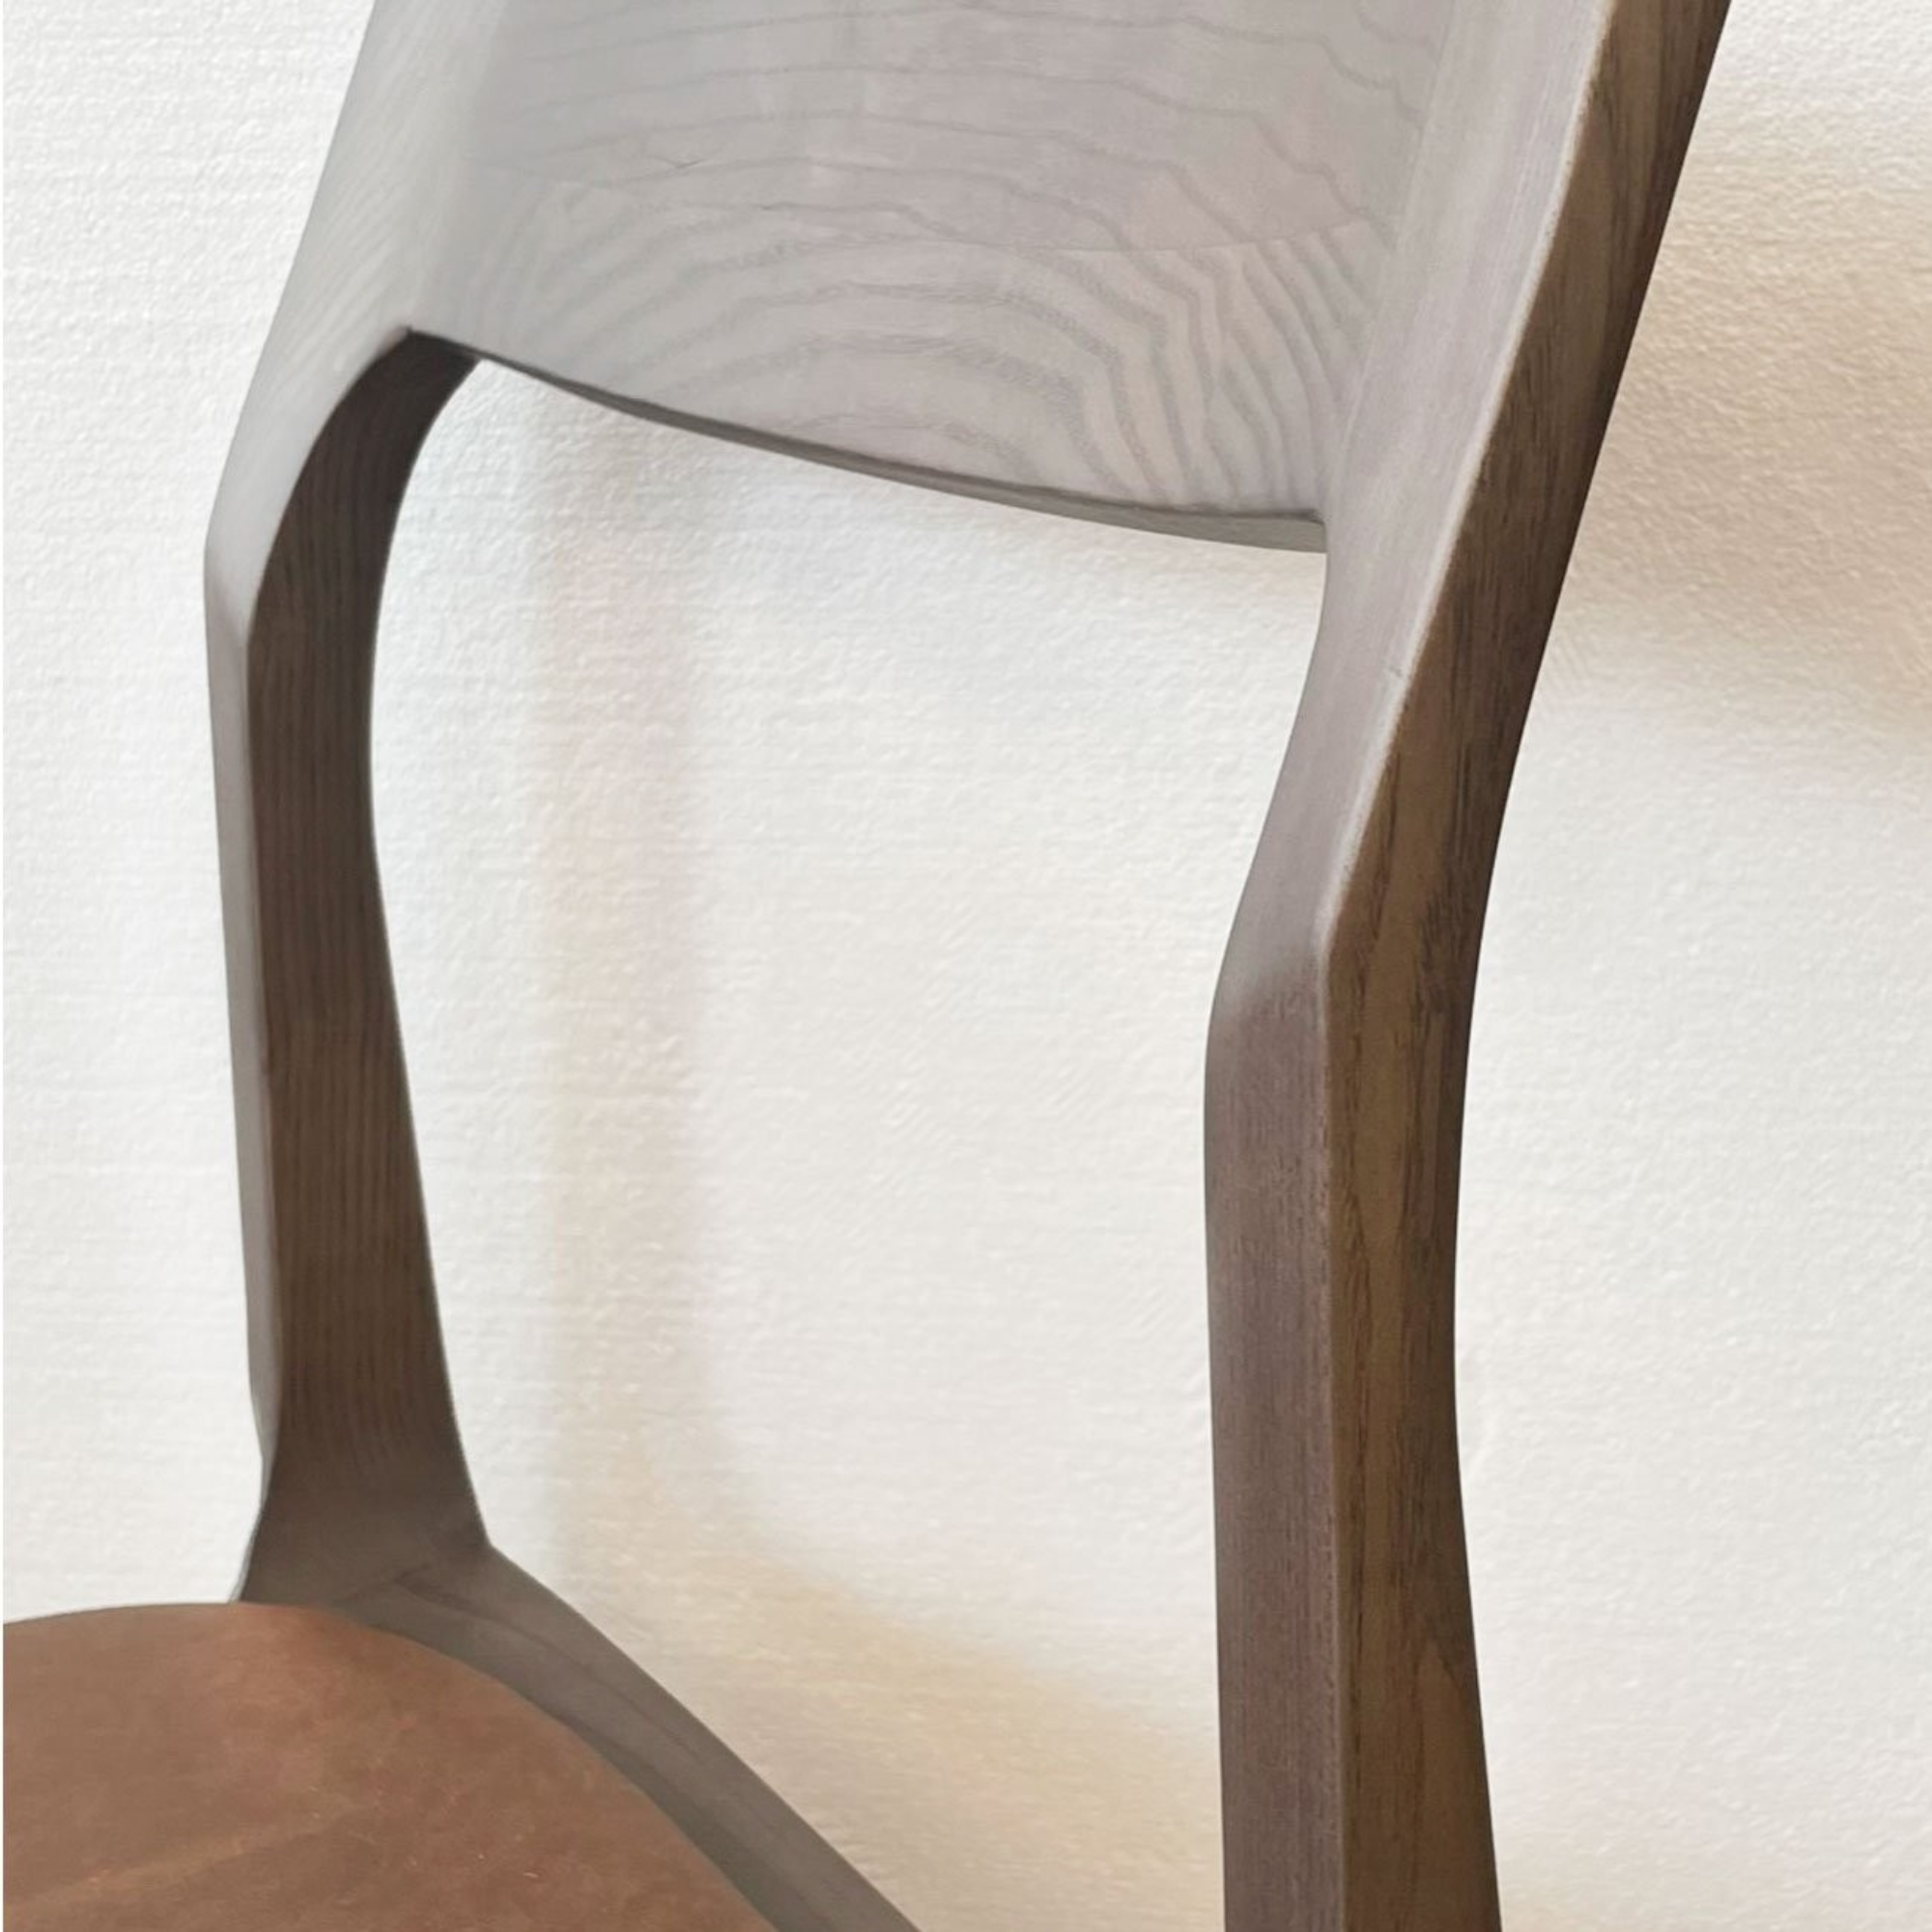 COOPER ASH STACKABLE DINING CHAIR